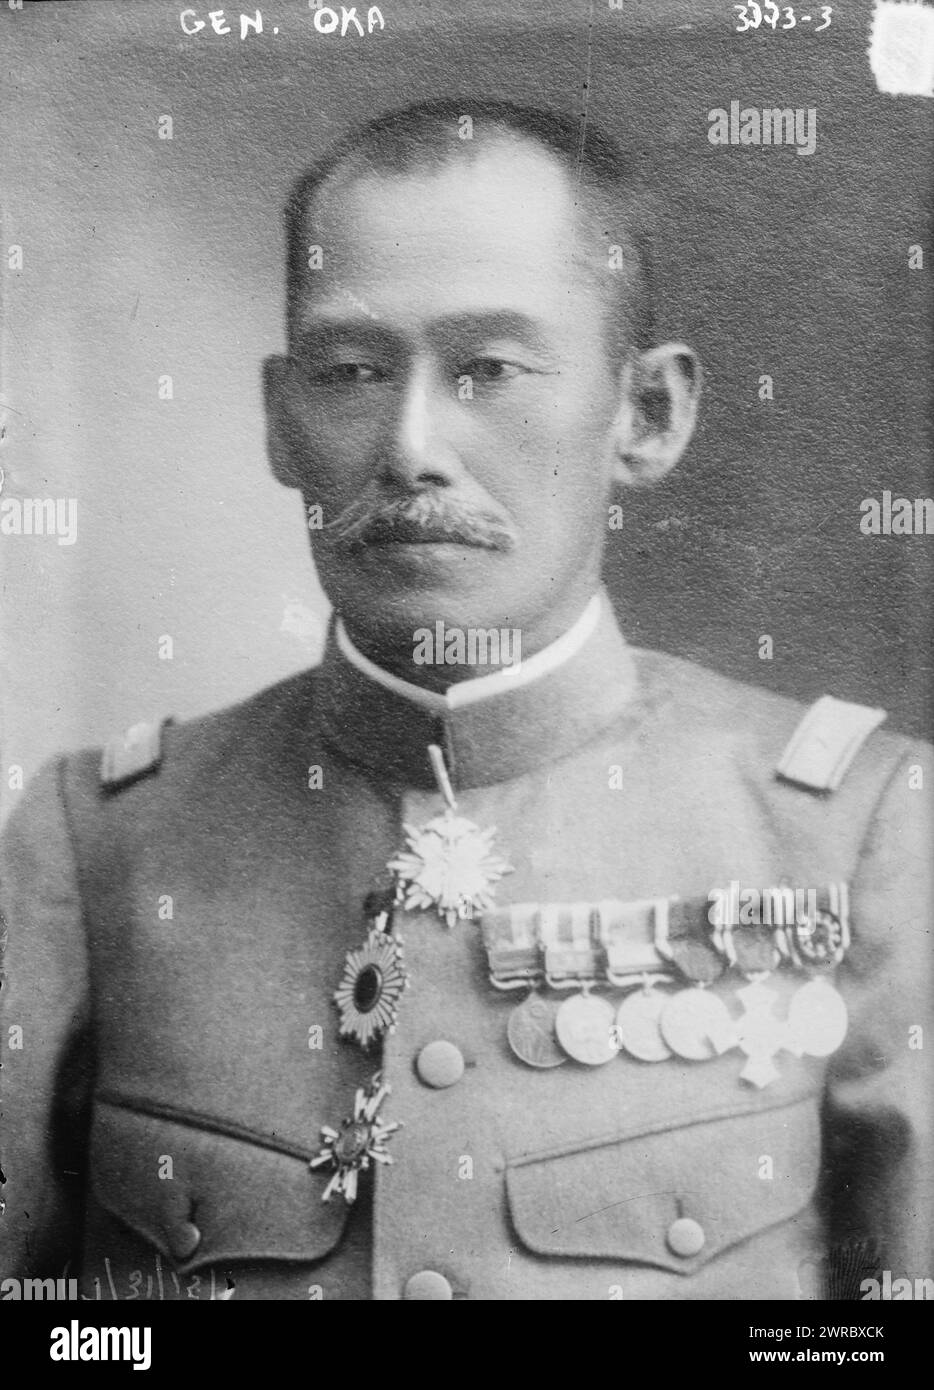 Gen. Oka, Photograph shows Baron Oka Ichinosuke (1860-1916) who served as a general in the Imperial Japanese Army and as Minister of War during World War I., between ca. 1910 and ca. 1915, Glass negatives, 1 negative: glass Stock Photo